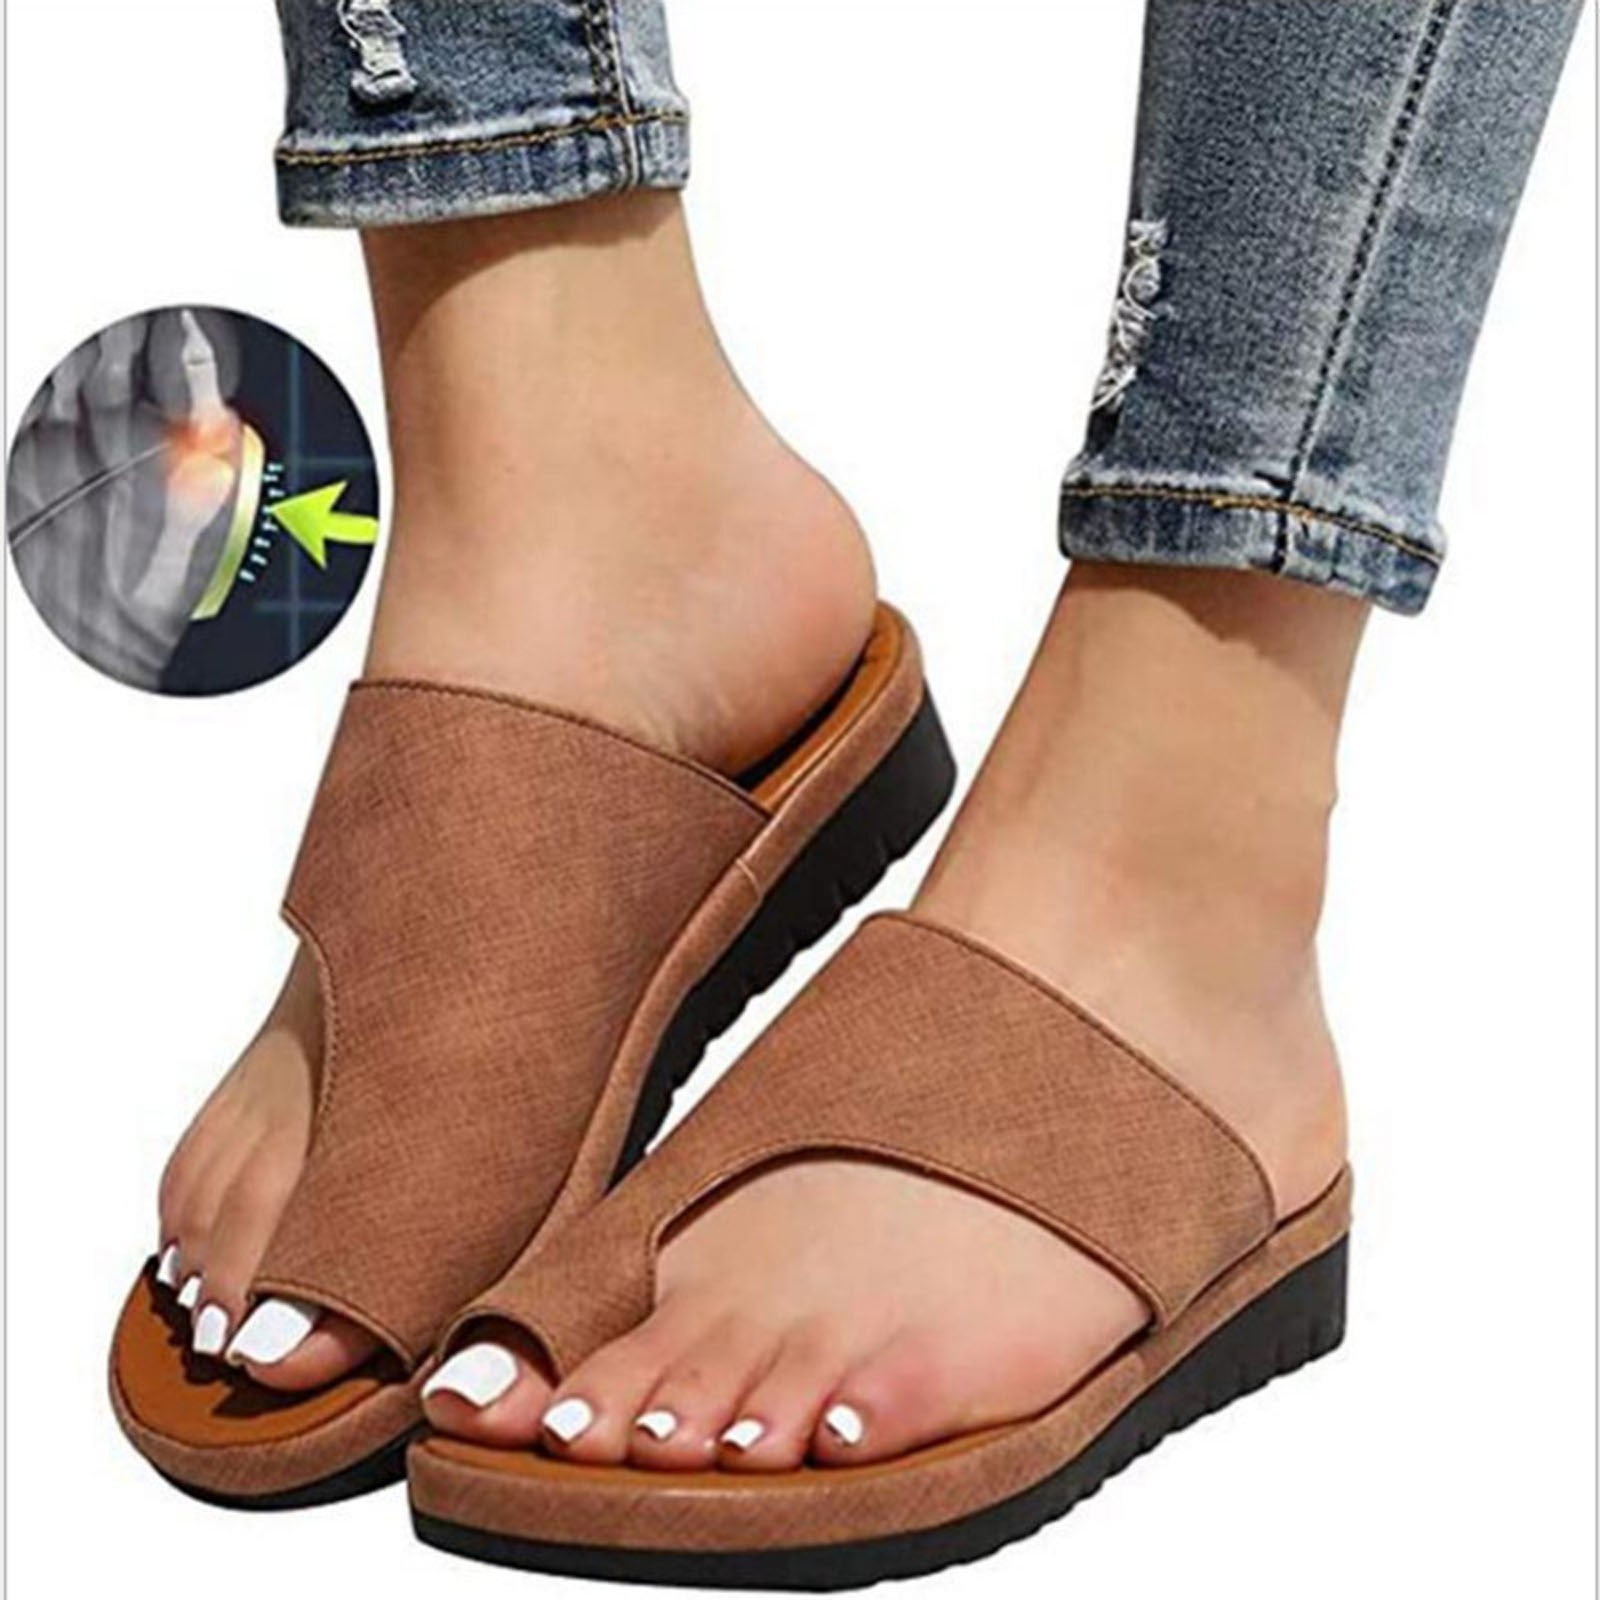 PU LEATHER with Bunion Corrector New Women Ladies Comfy Platform Sandals 